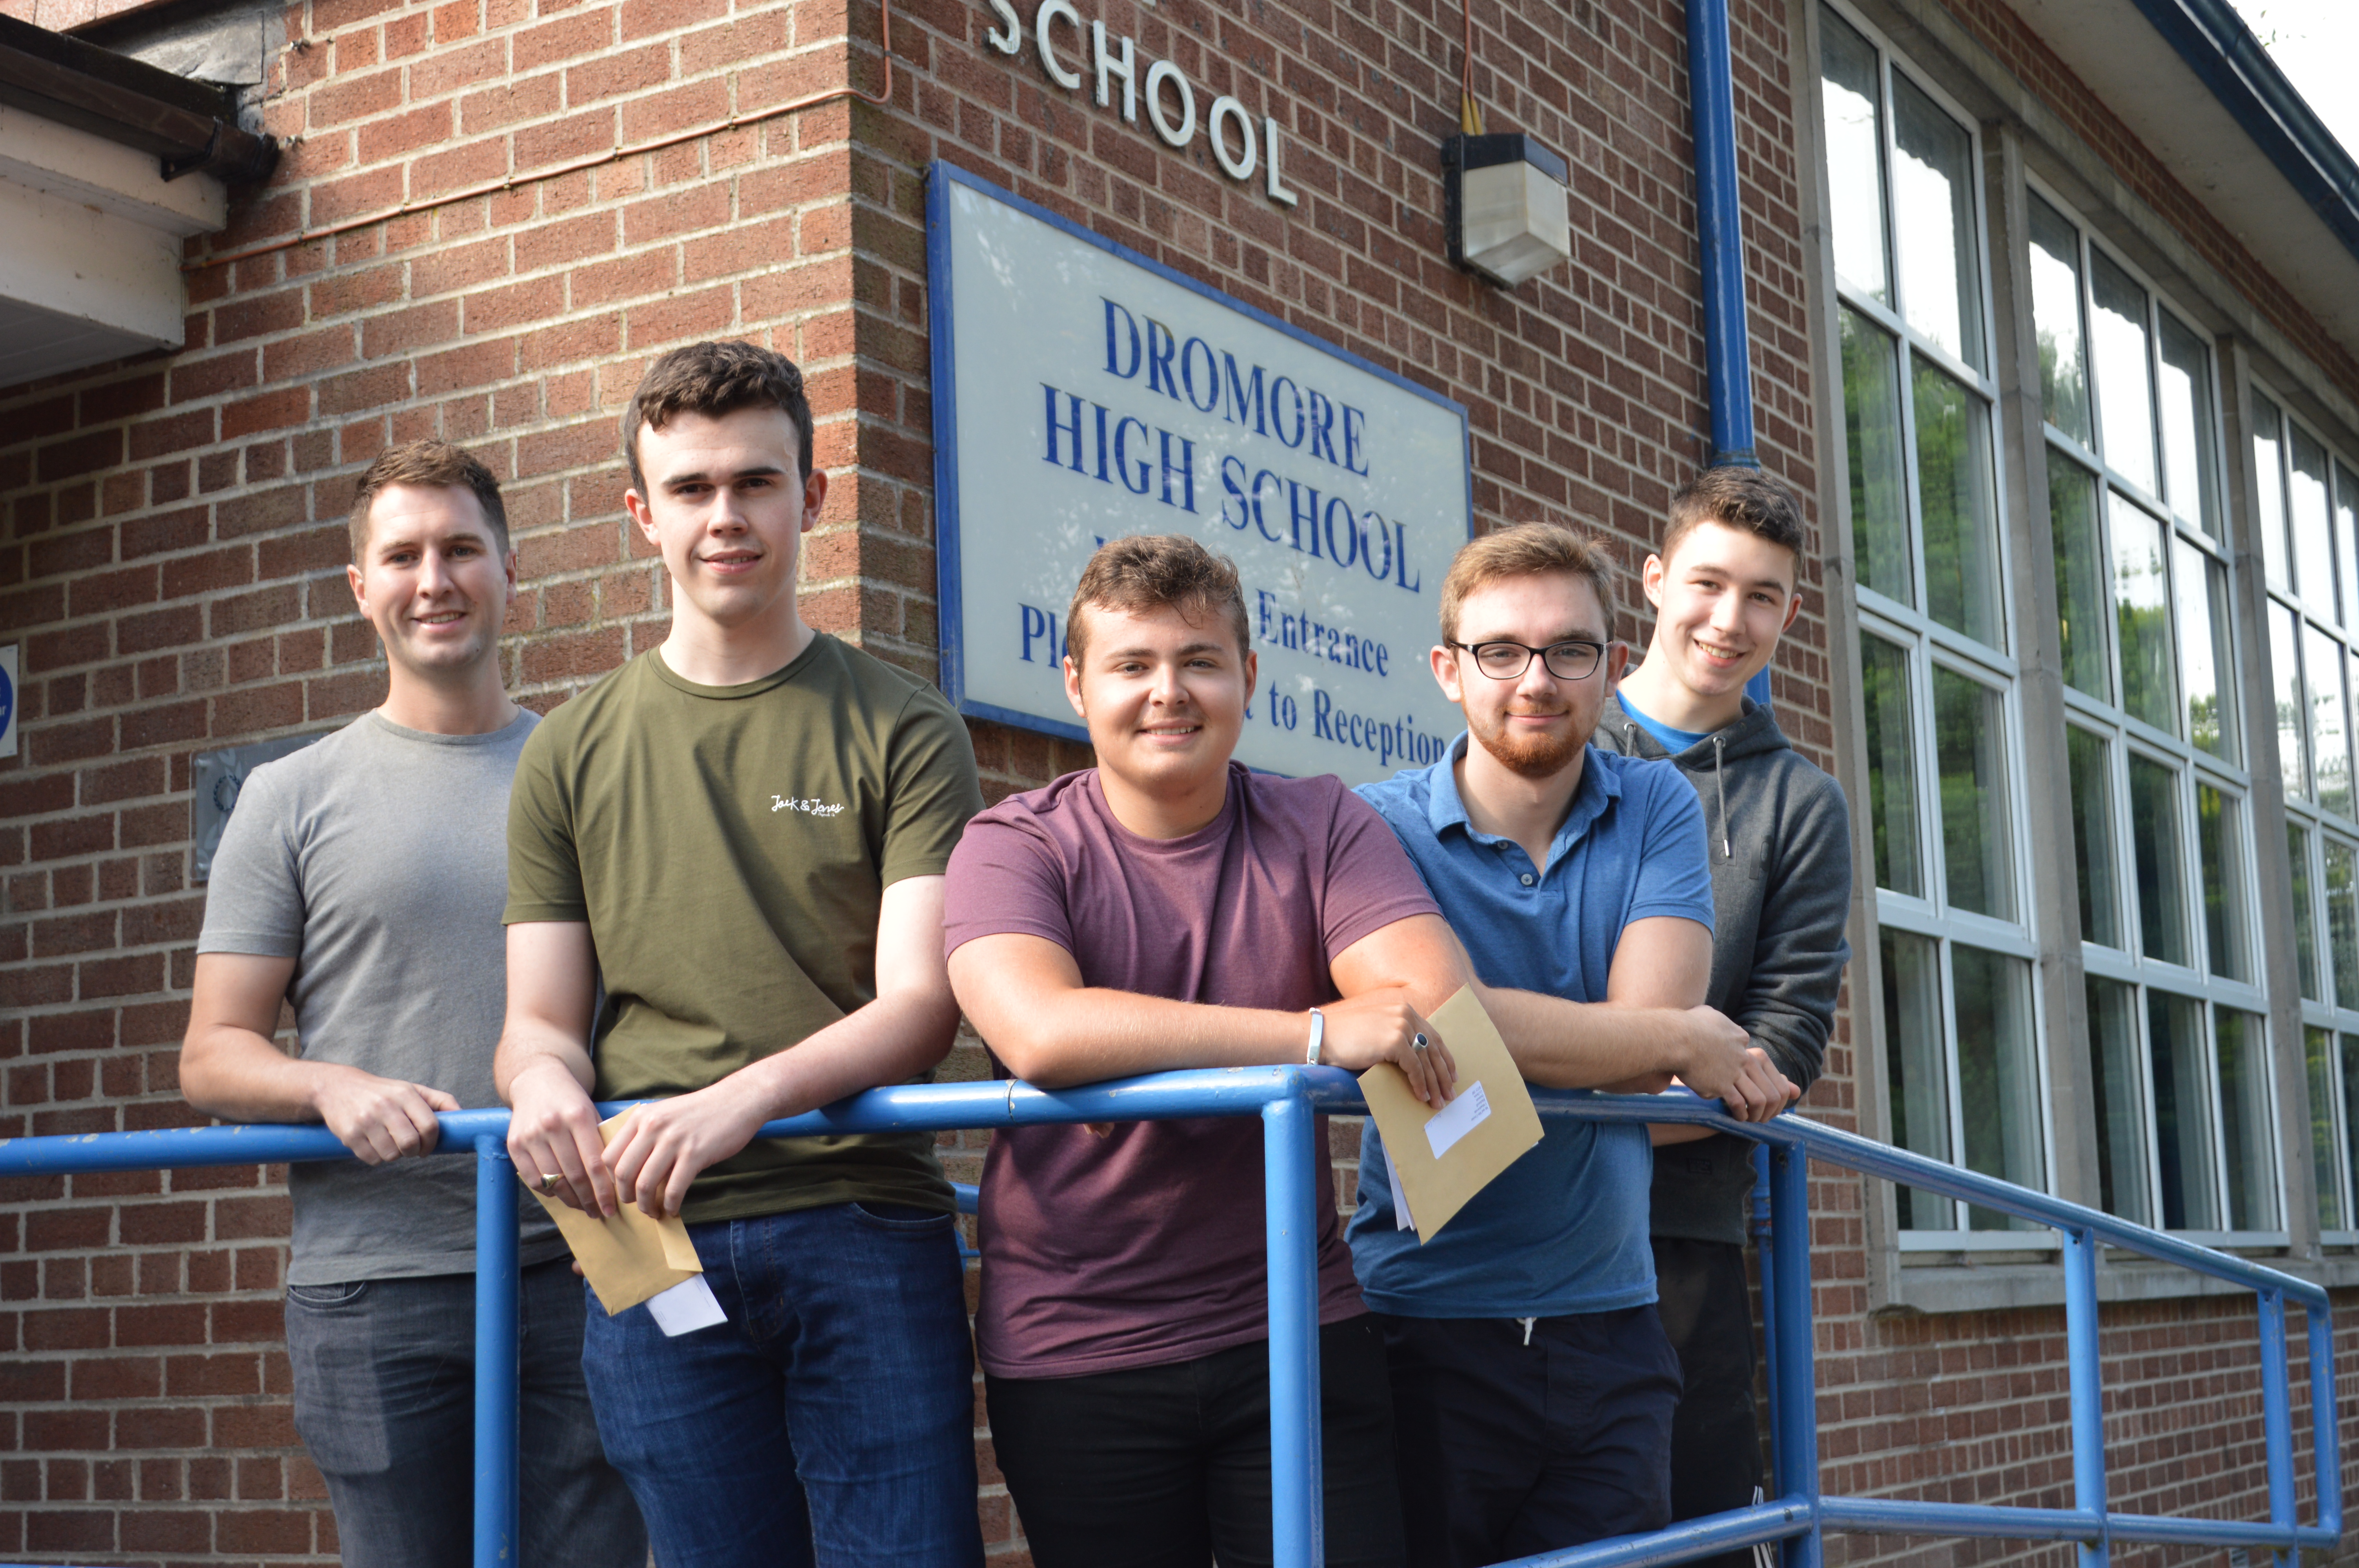 Dromore High School A level results day 2019